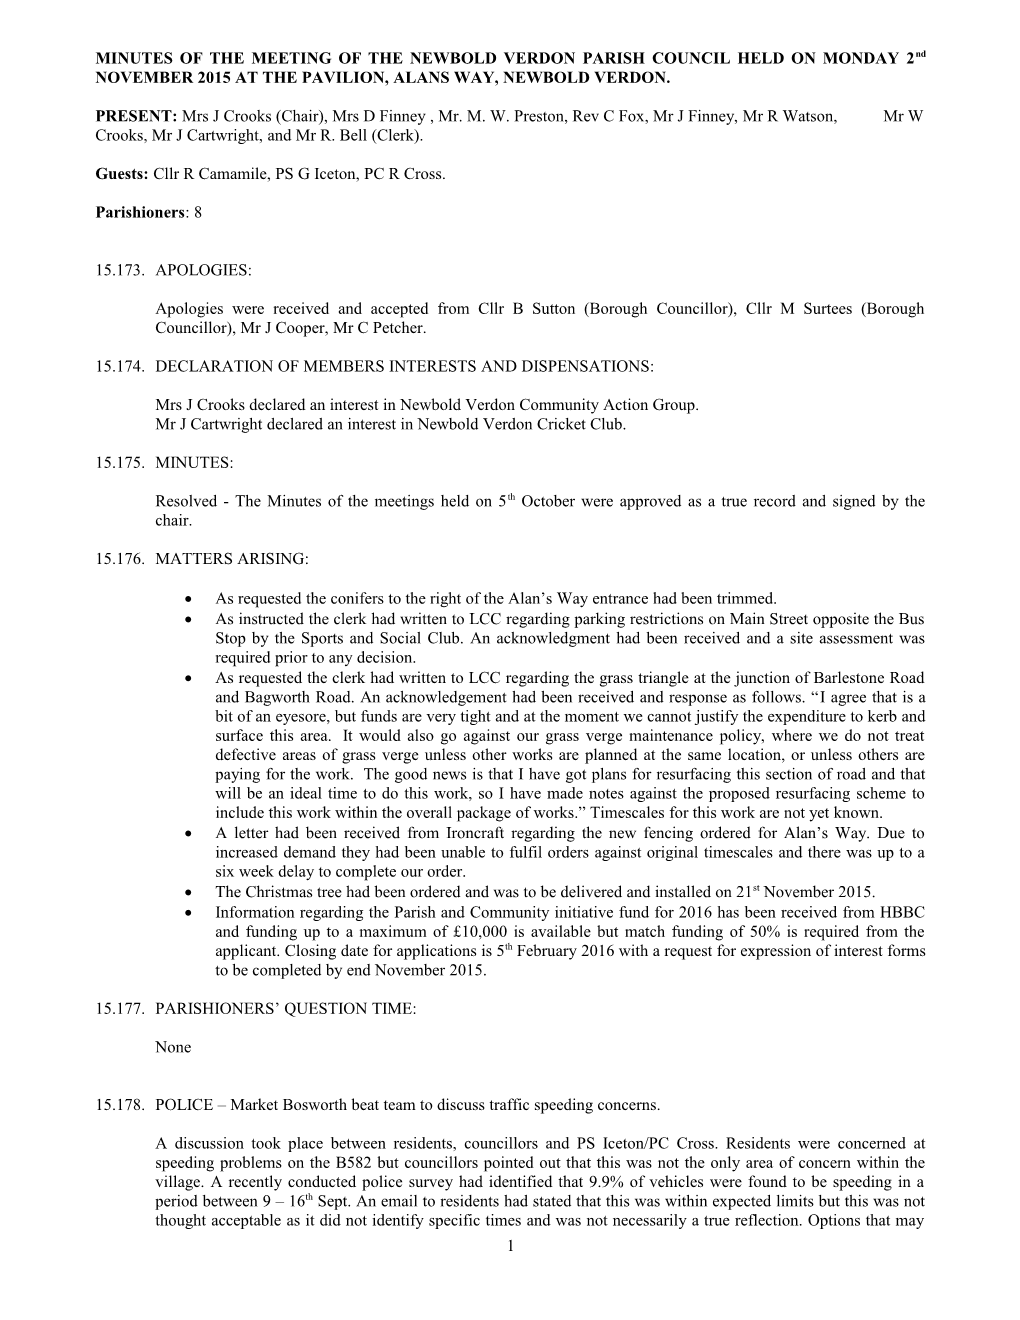 Minutes of the Meeting of the Newbold Verdon Parish Council Held on Monday 7 June 1999